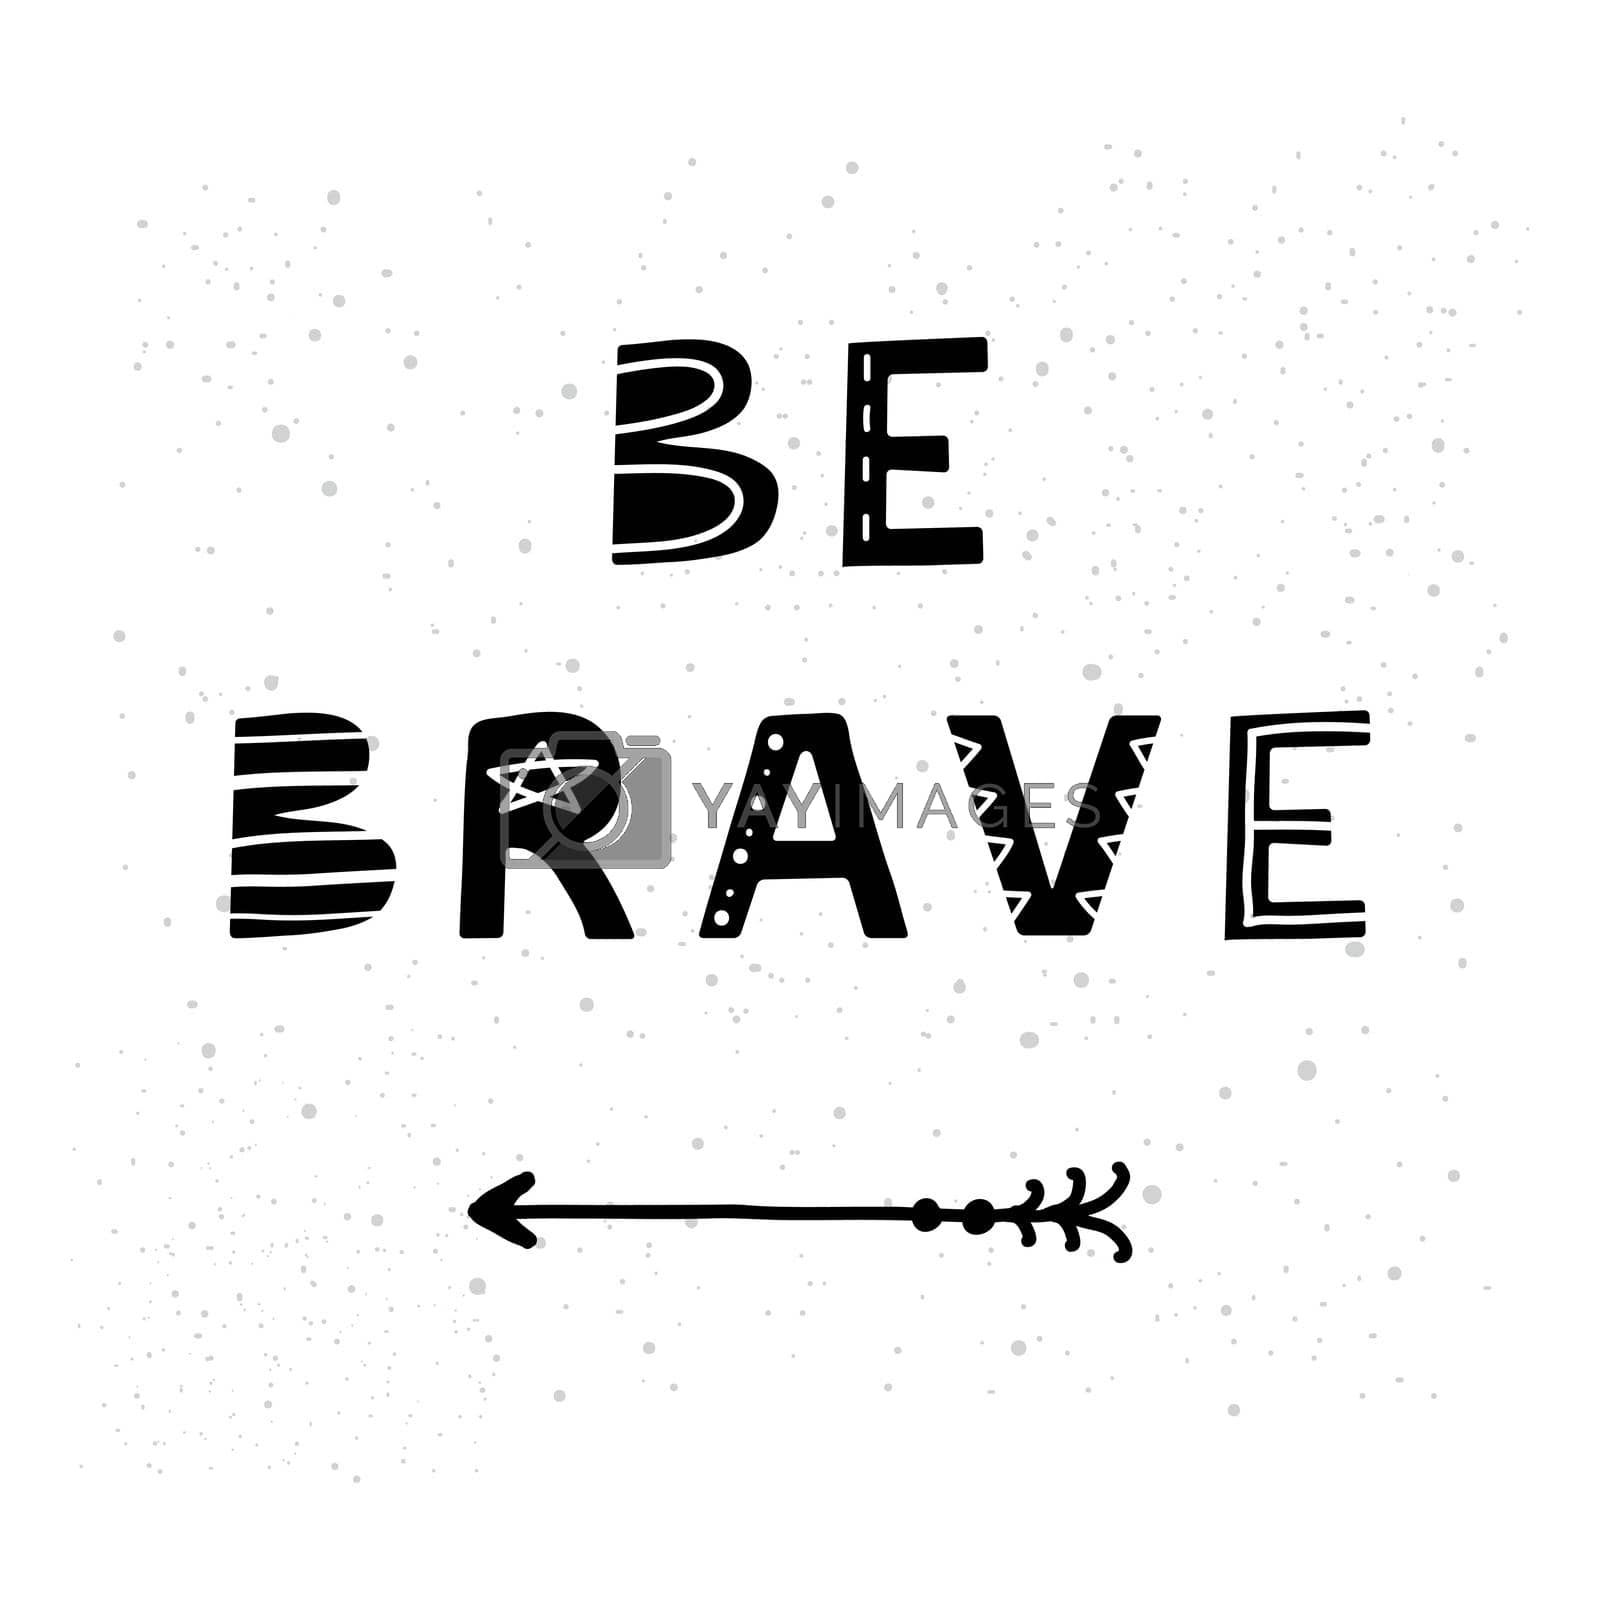 Royalty free image of Be brave poster. by Minur